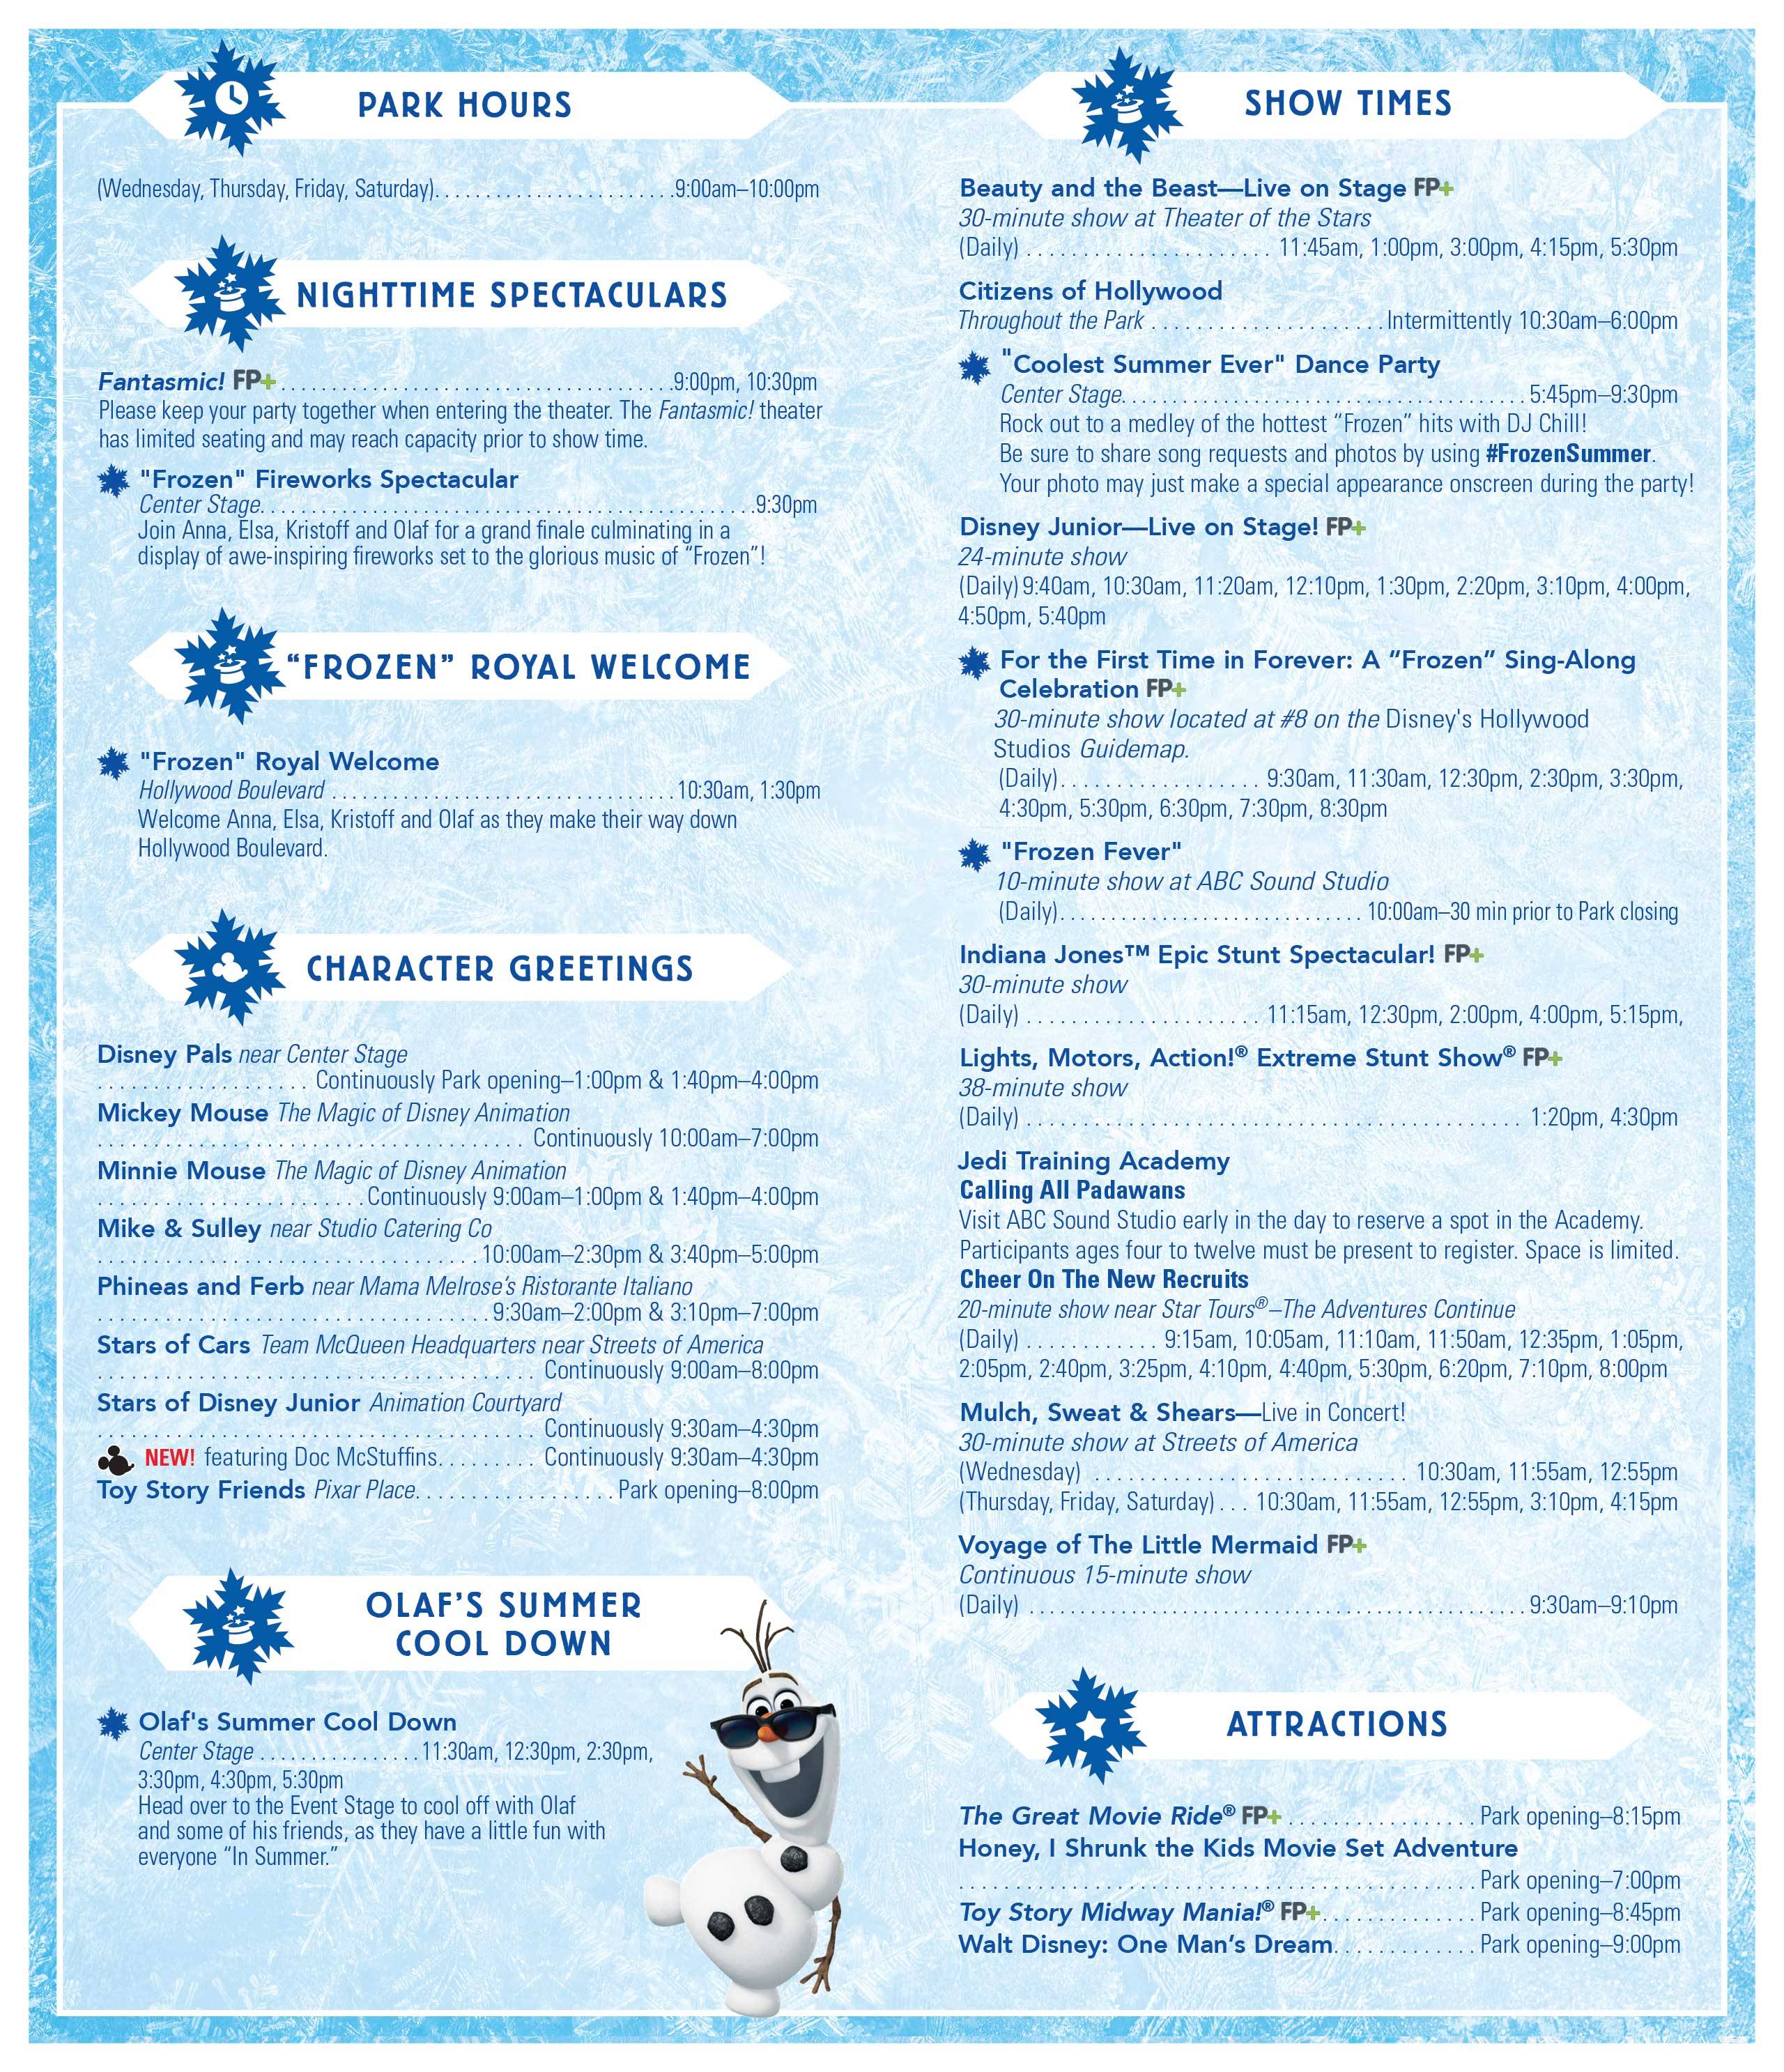 Frozen Summer Fun 2015 Guide Map and Times Guide